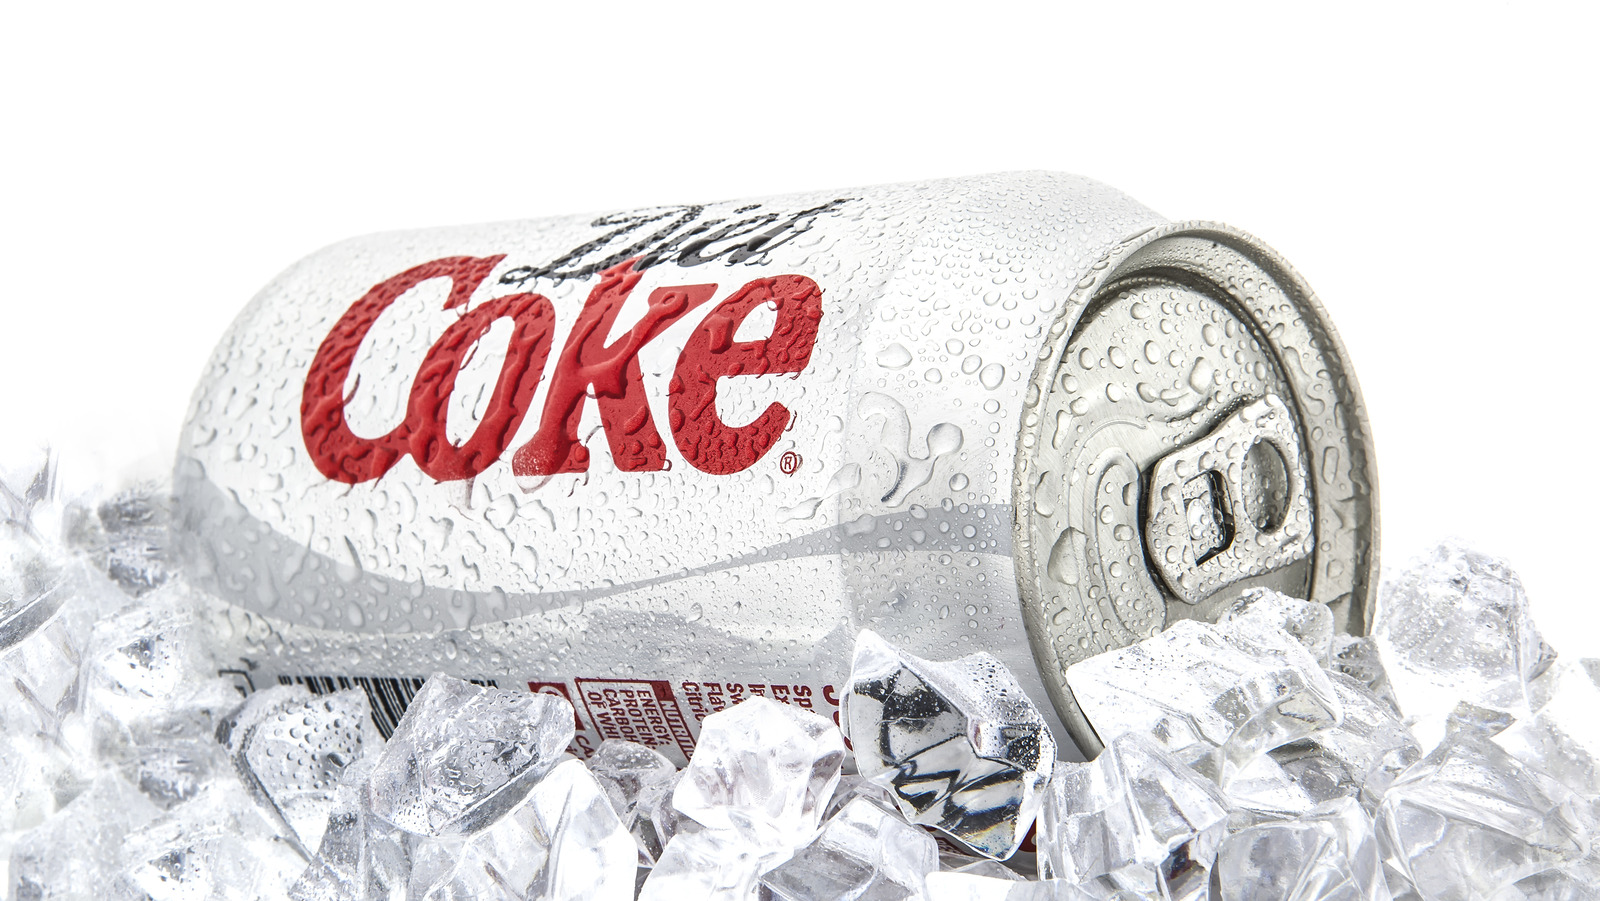 What Happens To Your Body When You Drink Diet Coke Every Day